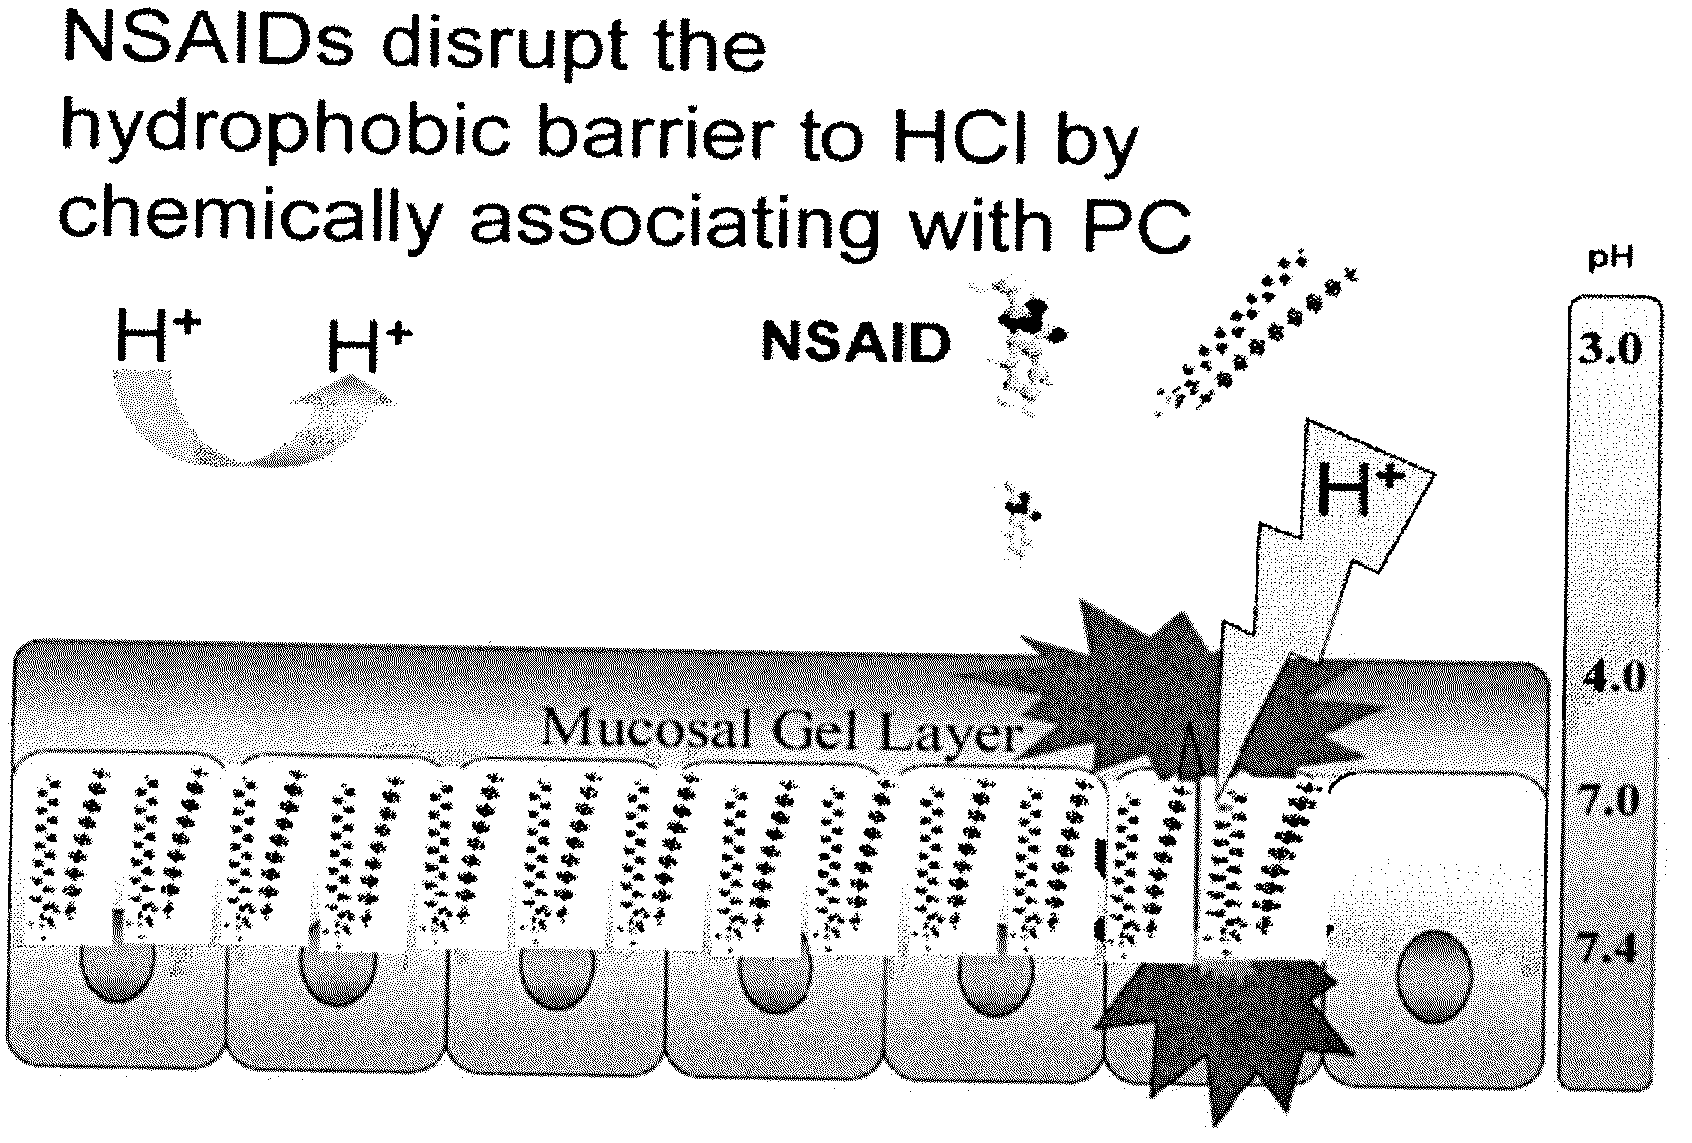 Oil-based nsaid compositions and methods for making and using same